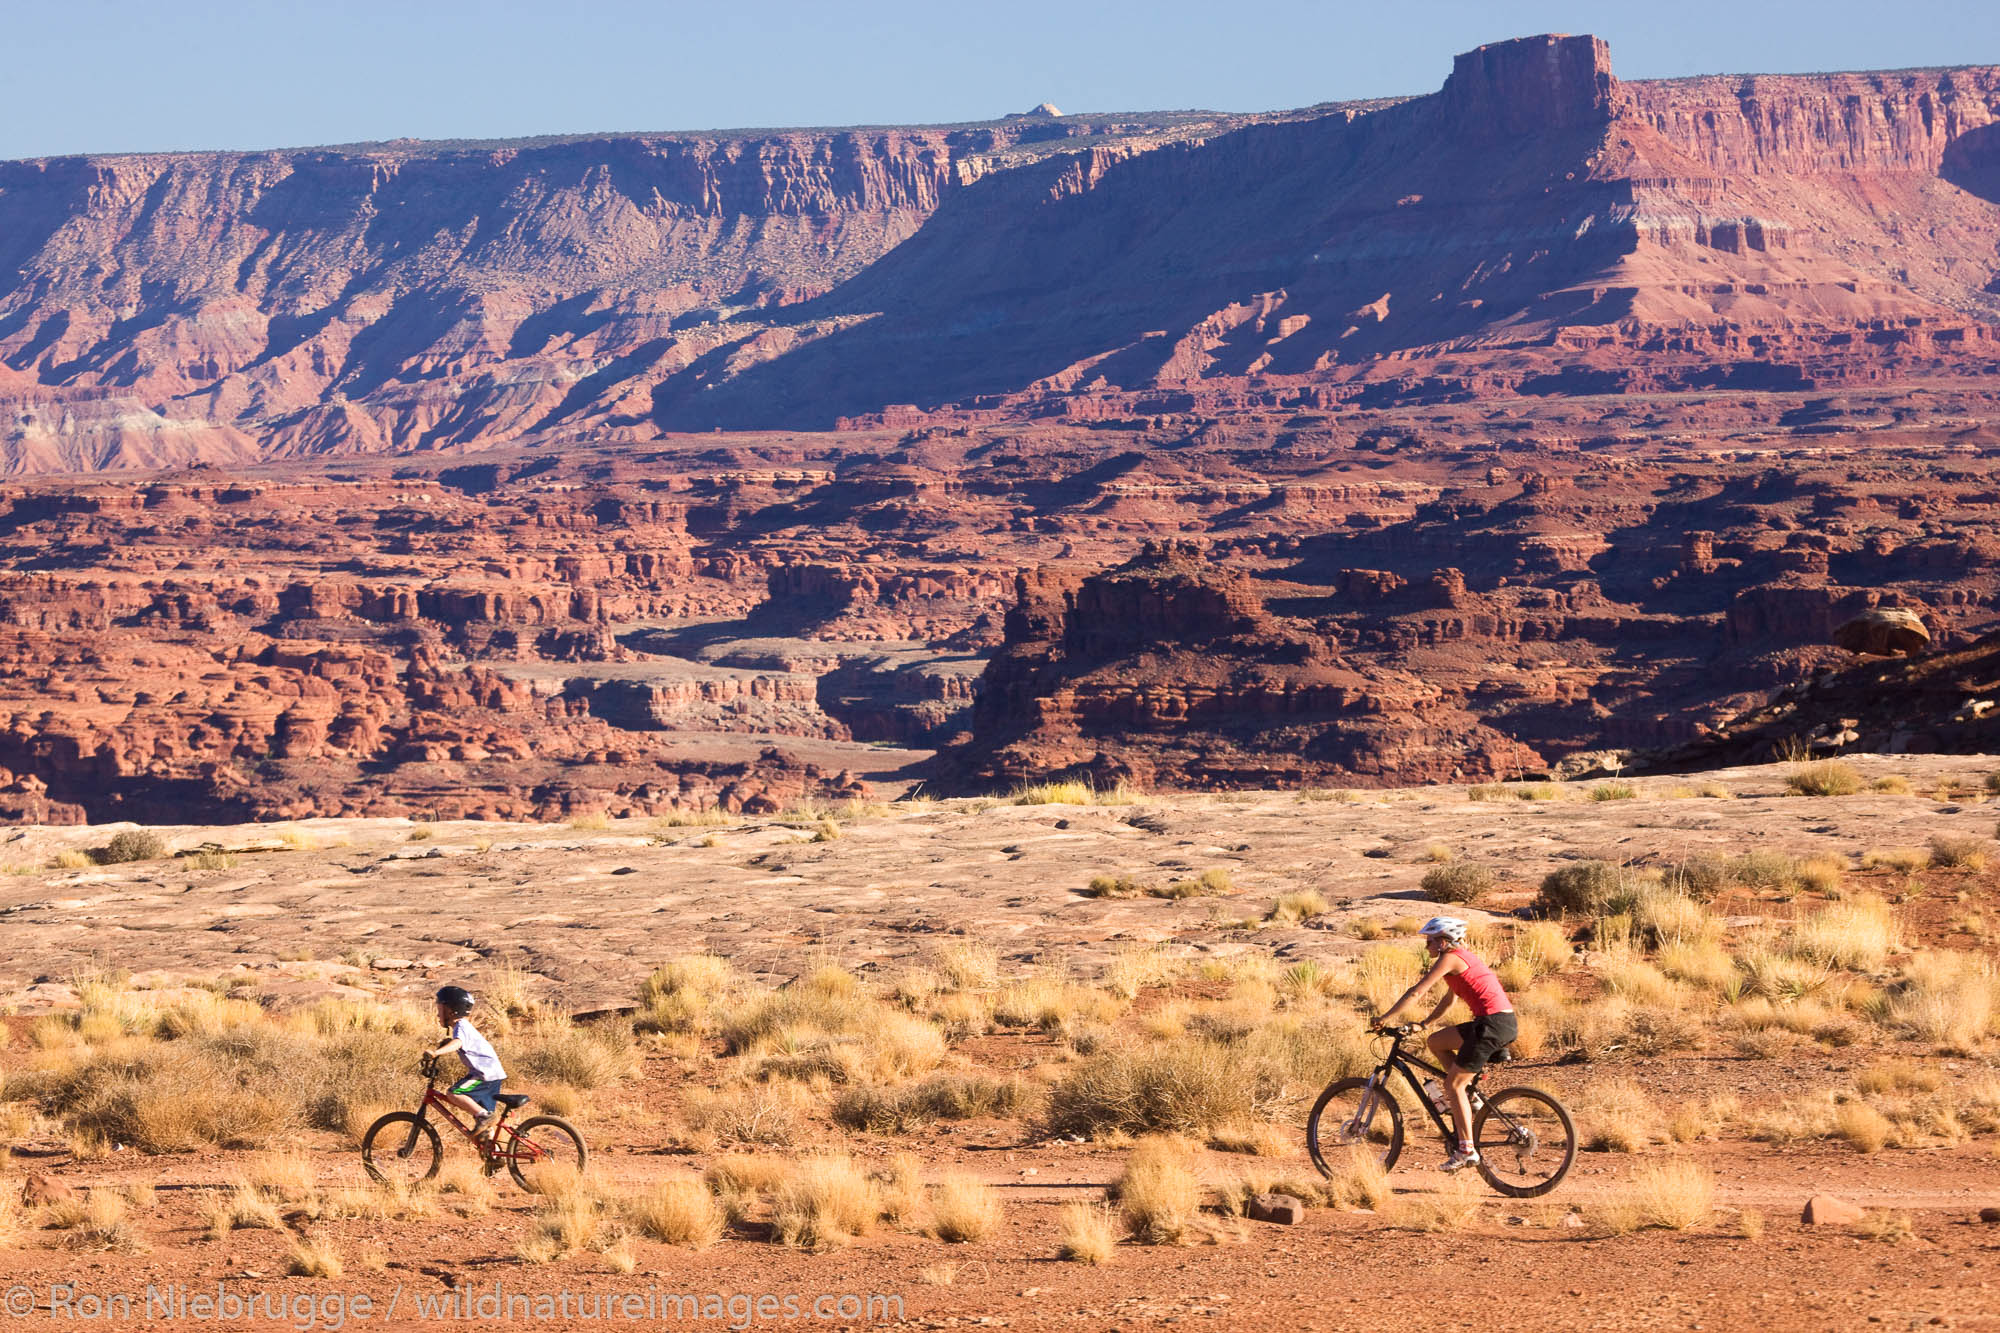 Mountain biking on the White Rim Trail, Island in the Sky District, Canyonlands National Park, near Moab, Utah.